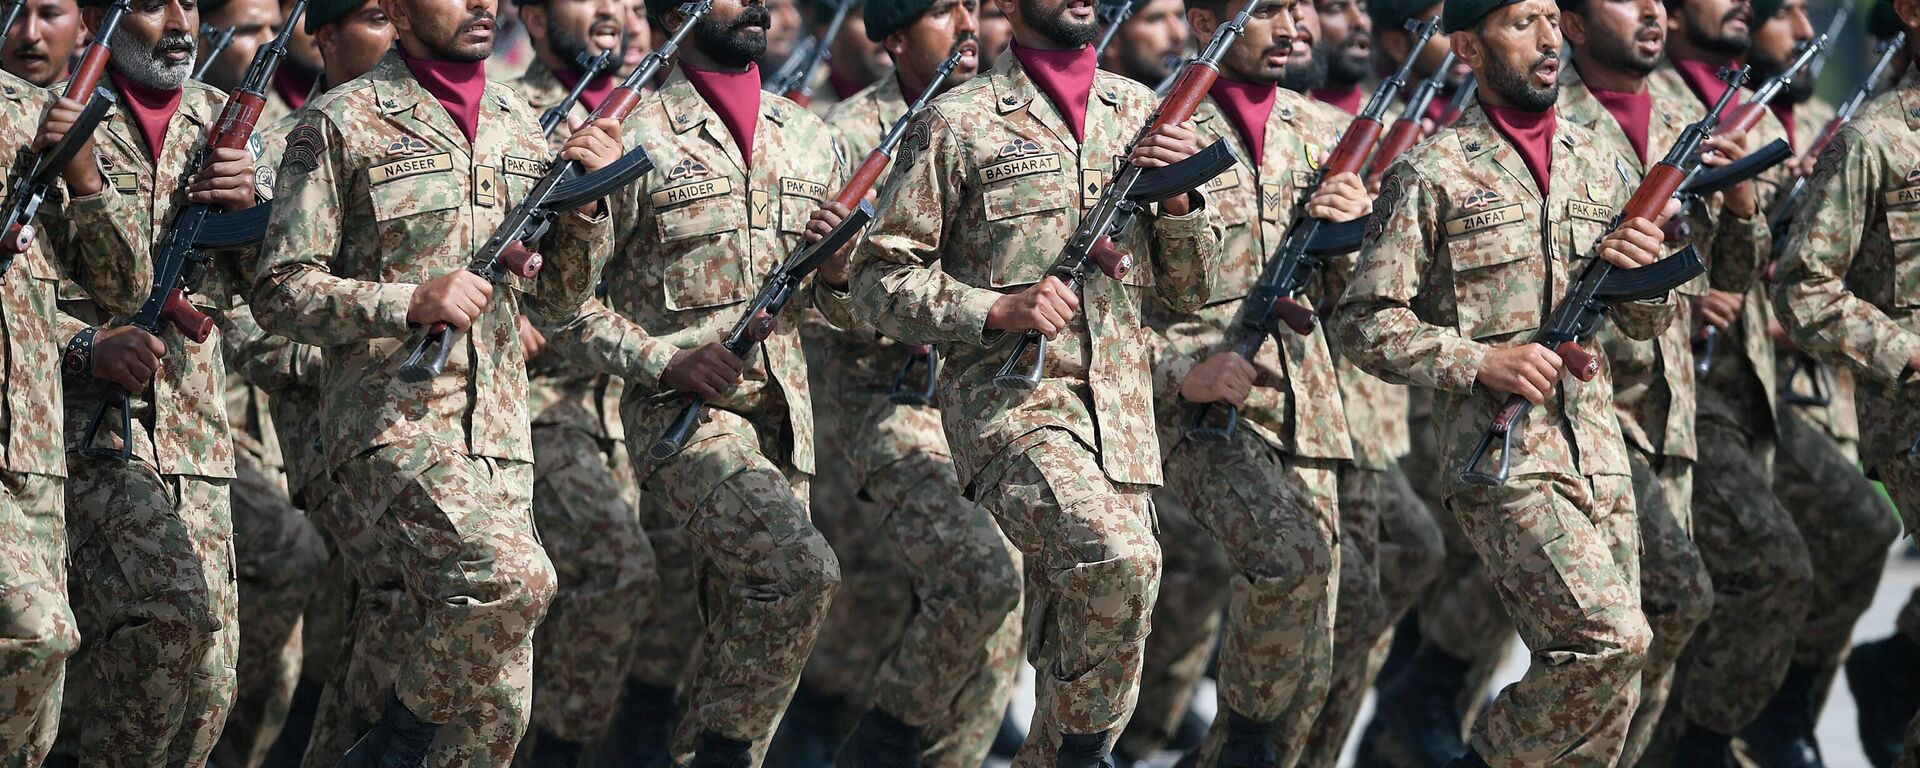 Pakistan's army soldiers march during a military parade to mark Pakistan's National Day in Islamabad on 25 March 2021. - Sputnik International, 1920, 14.04.2022